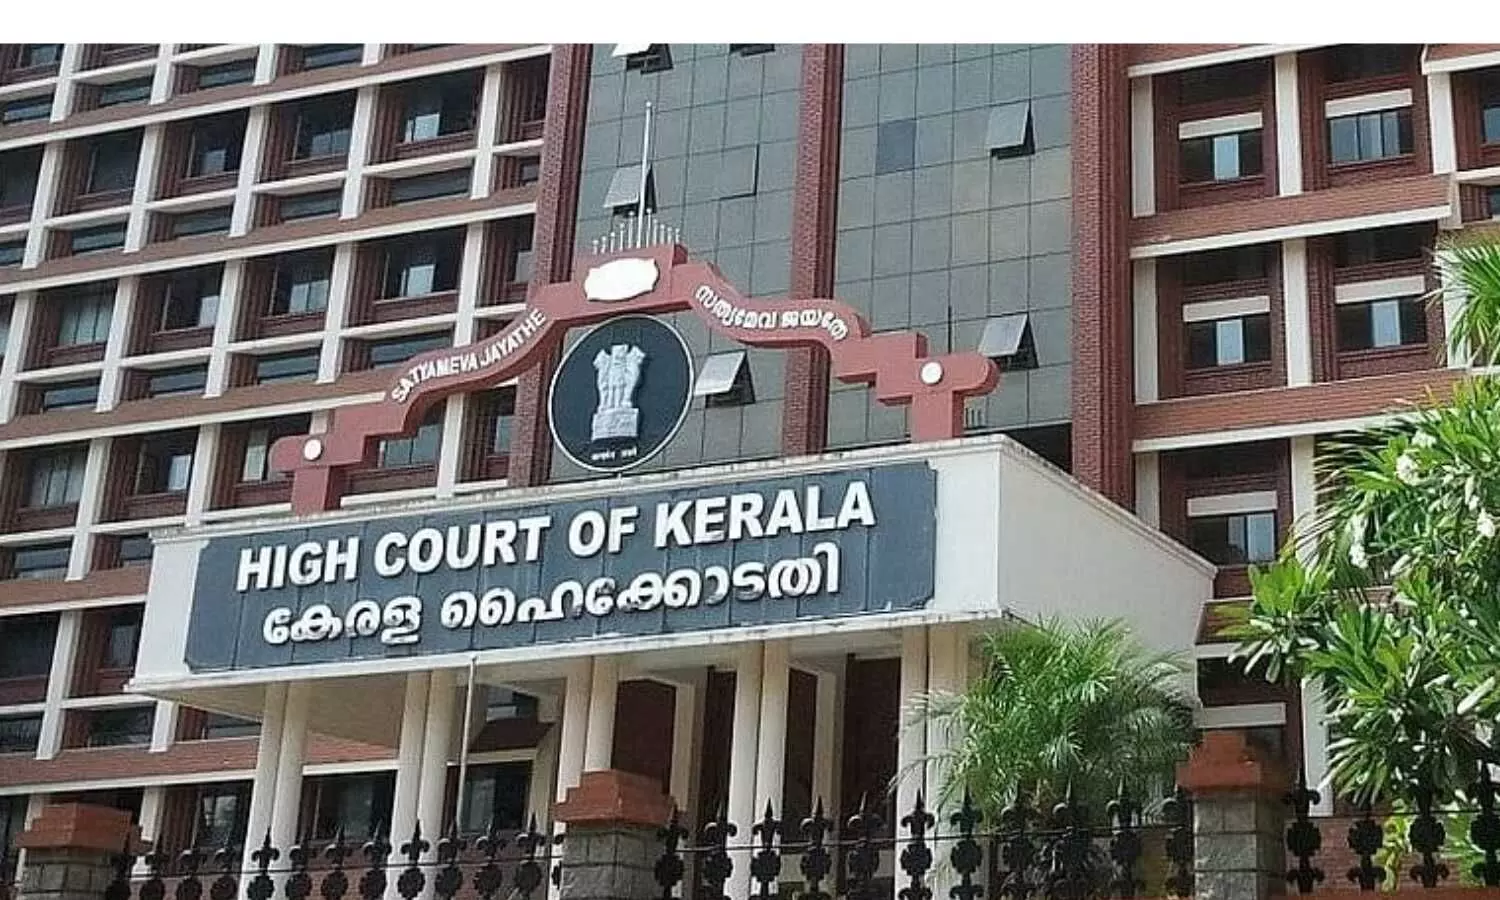 Any attack on doctors, medical personnel is unacceptable and non-negotiable: Kerala HC directs state to suggest measures to prevent violence